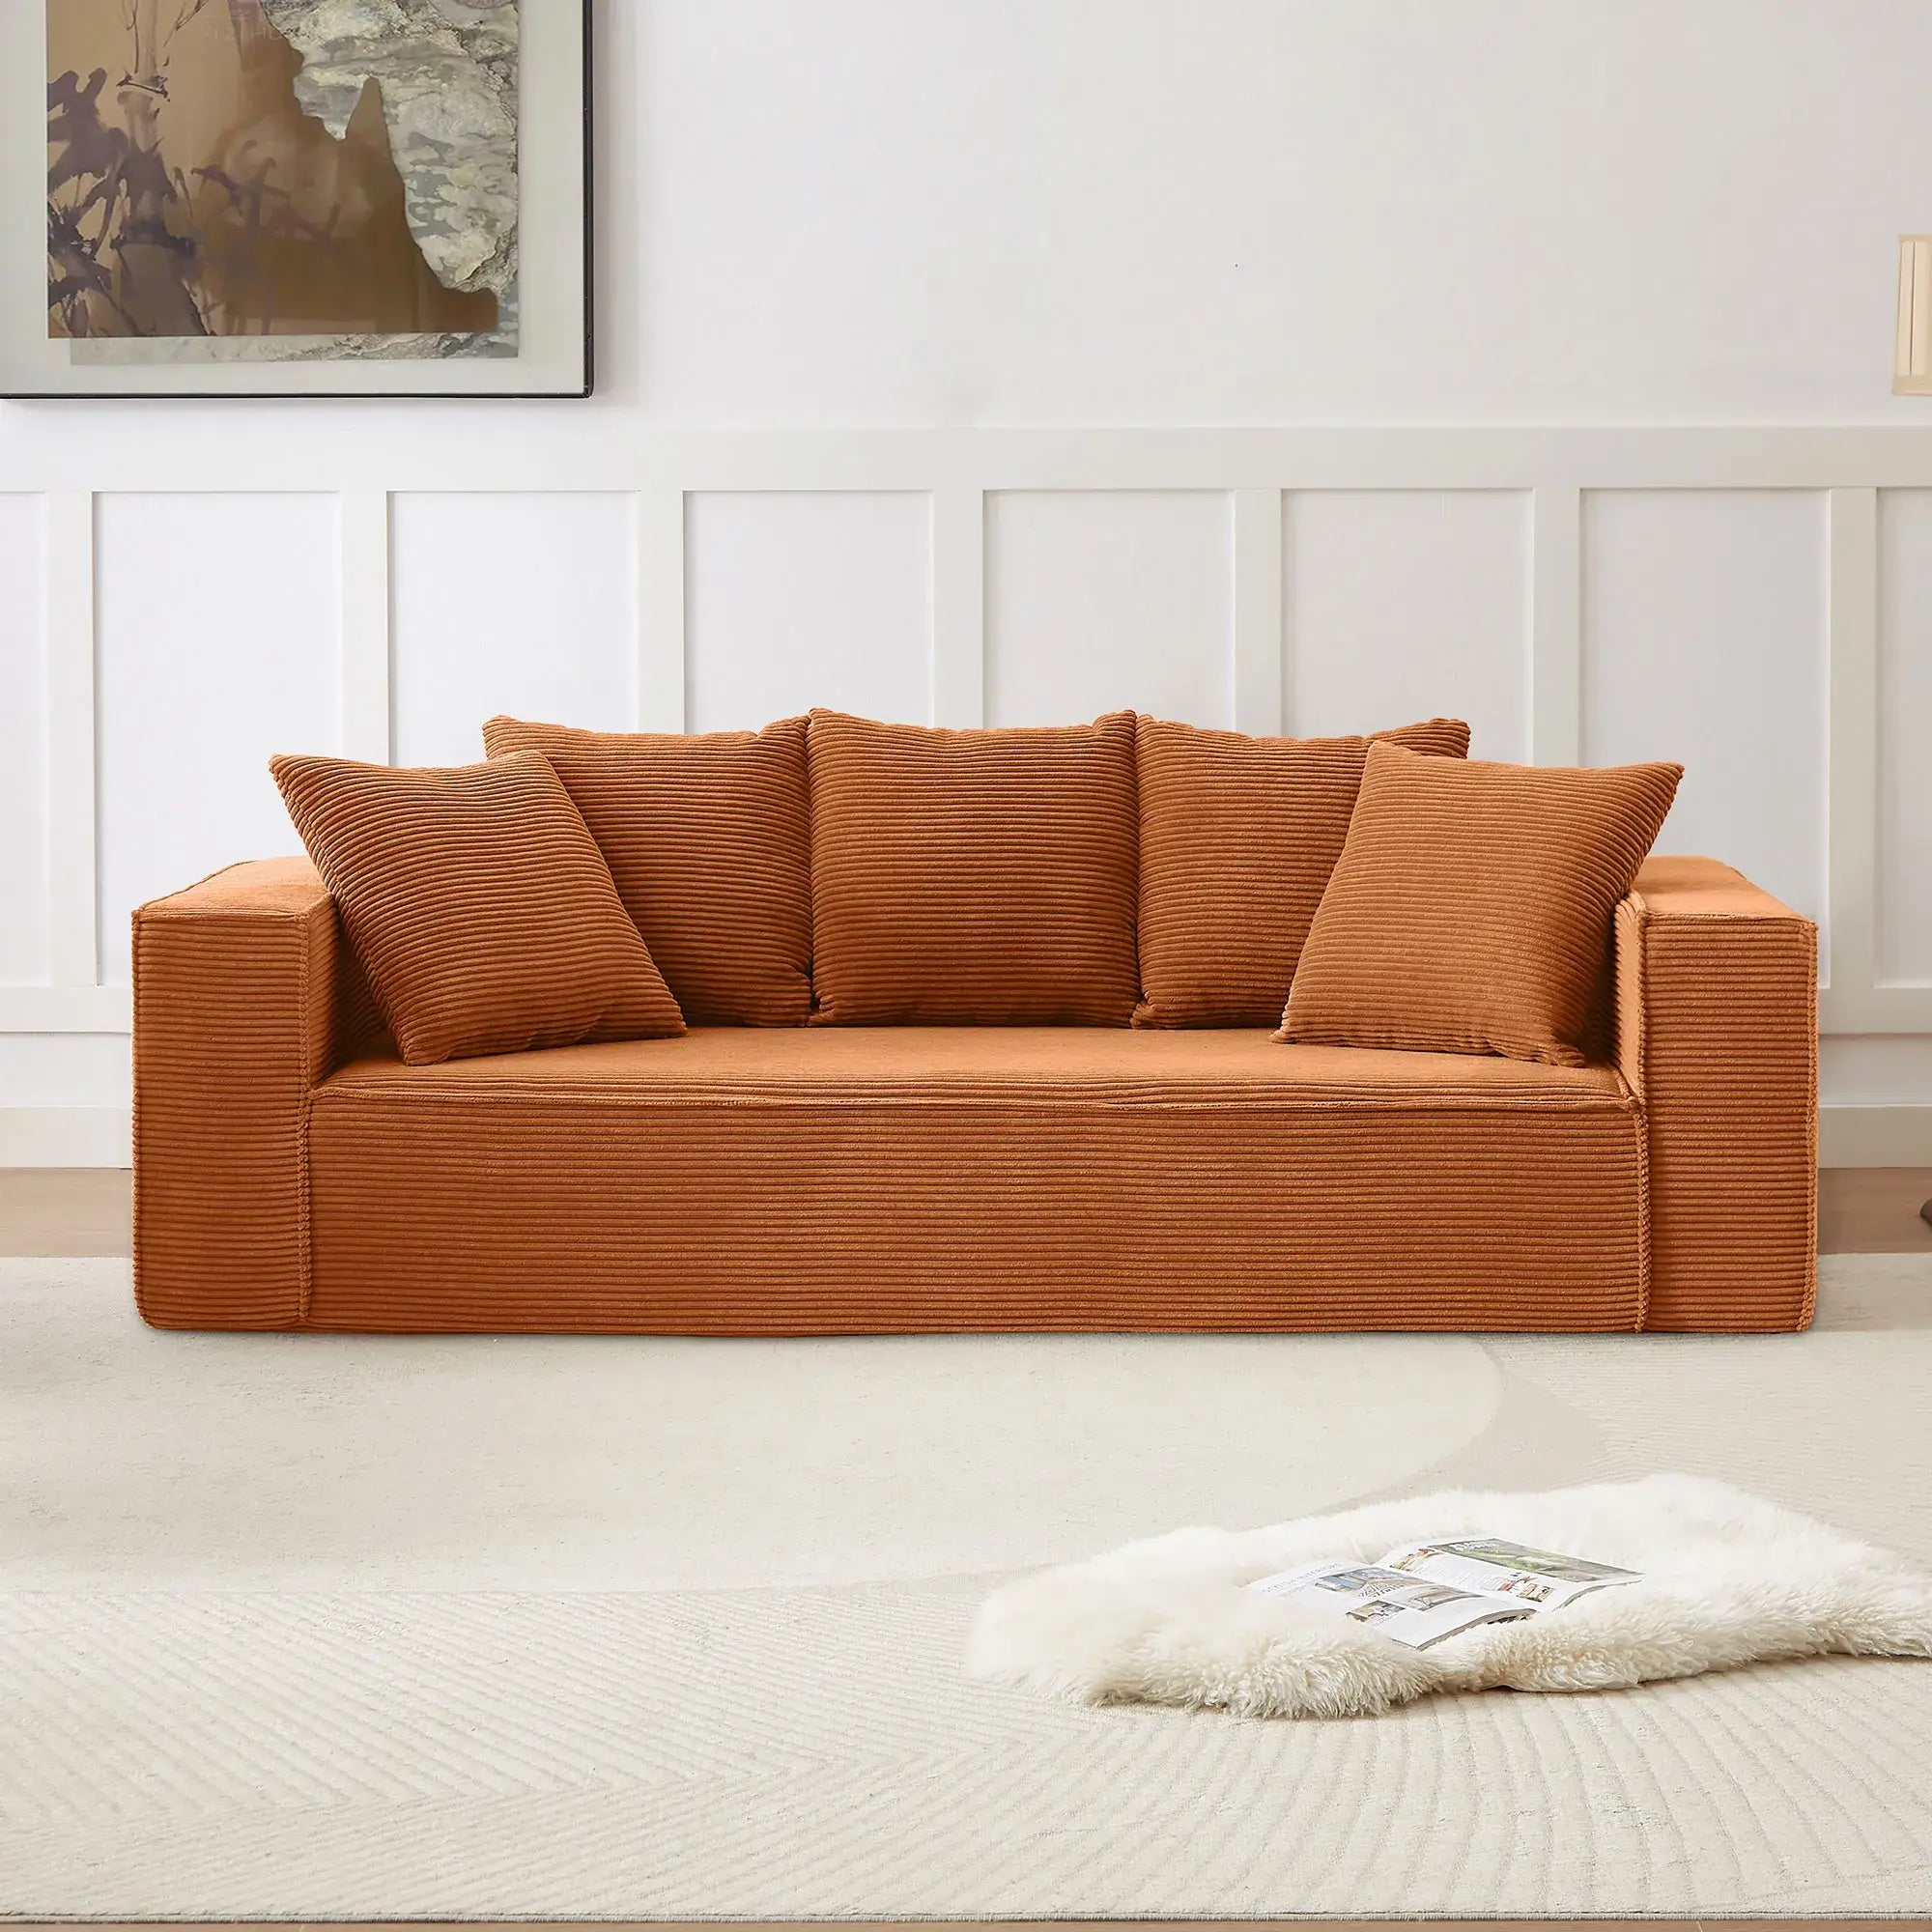 Louie Modern Corduroy Sofa, 3-Seater Couch for Living Room, Bedroom, Apartment - Orange